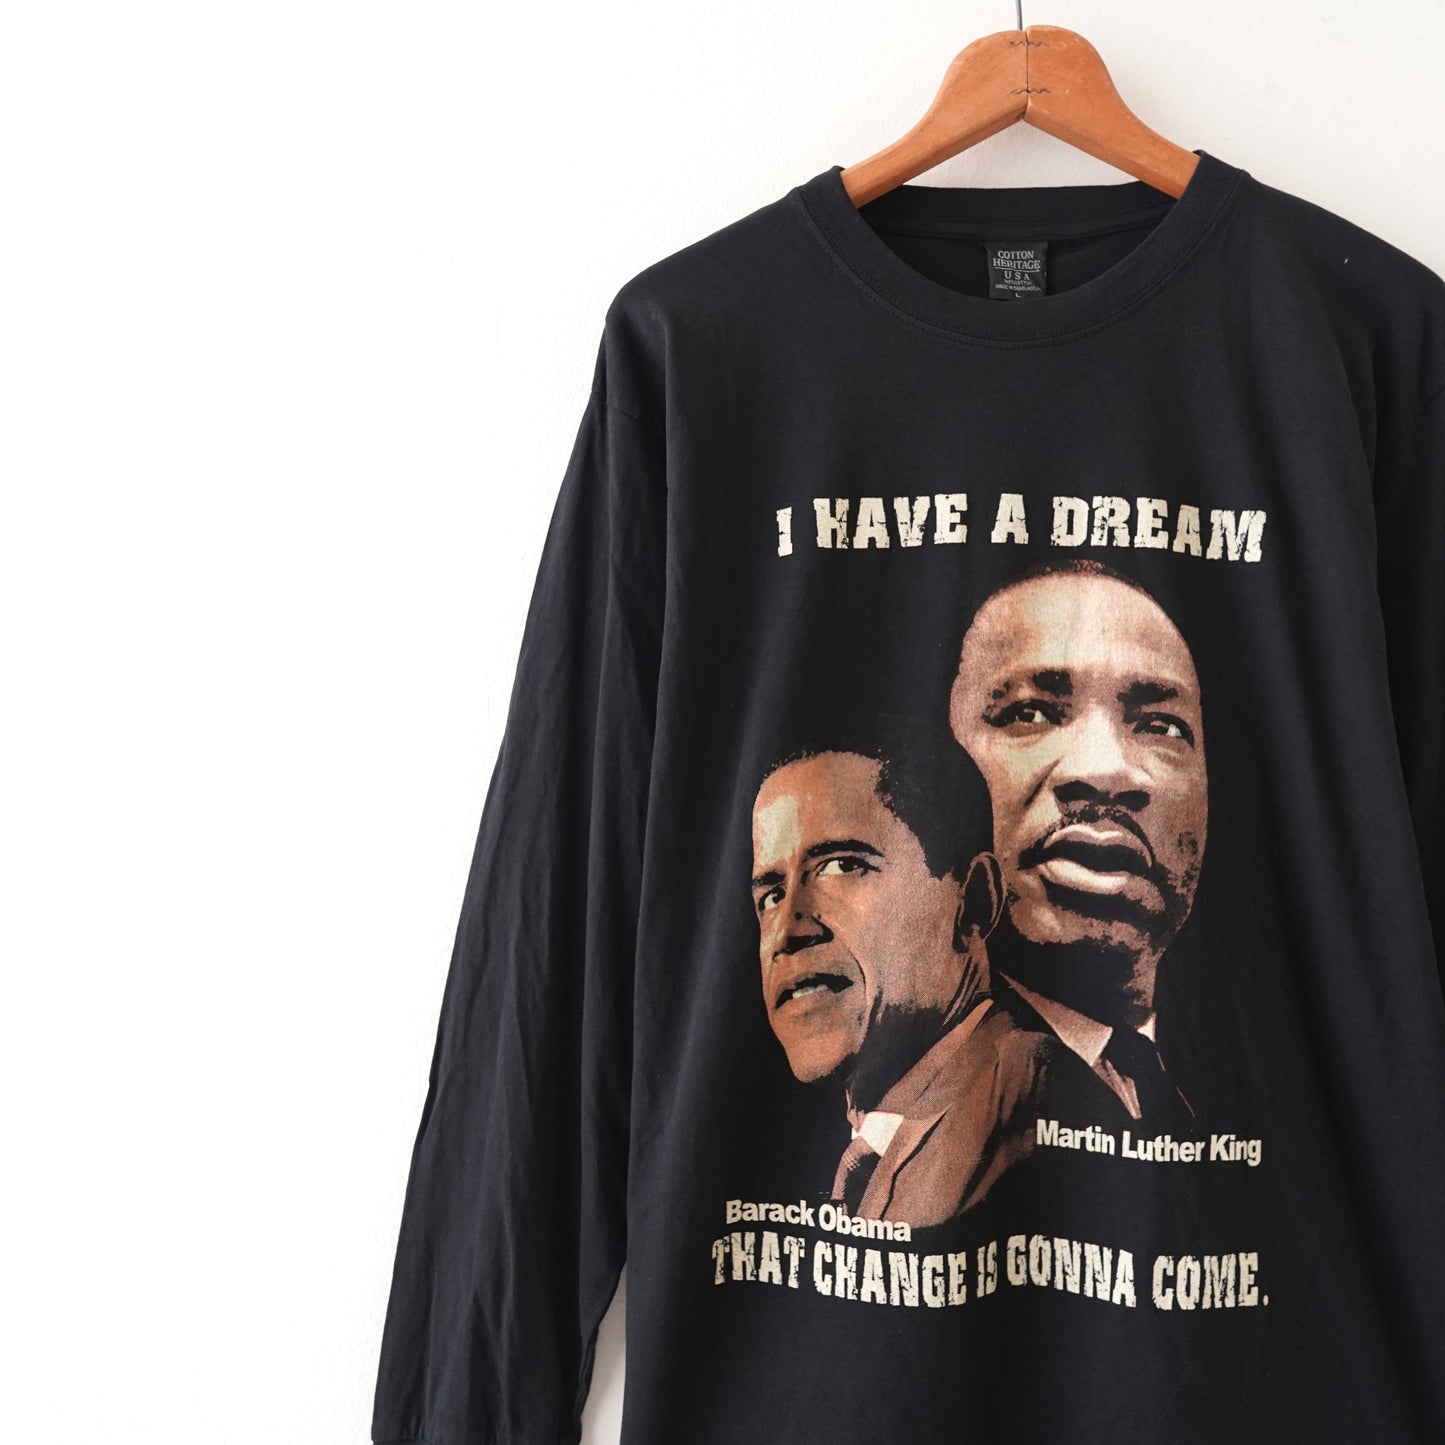 I HAVE A DREAM tee